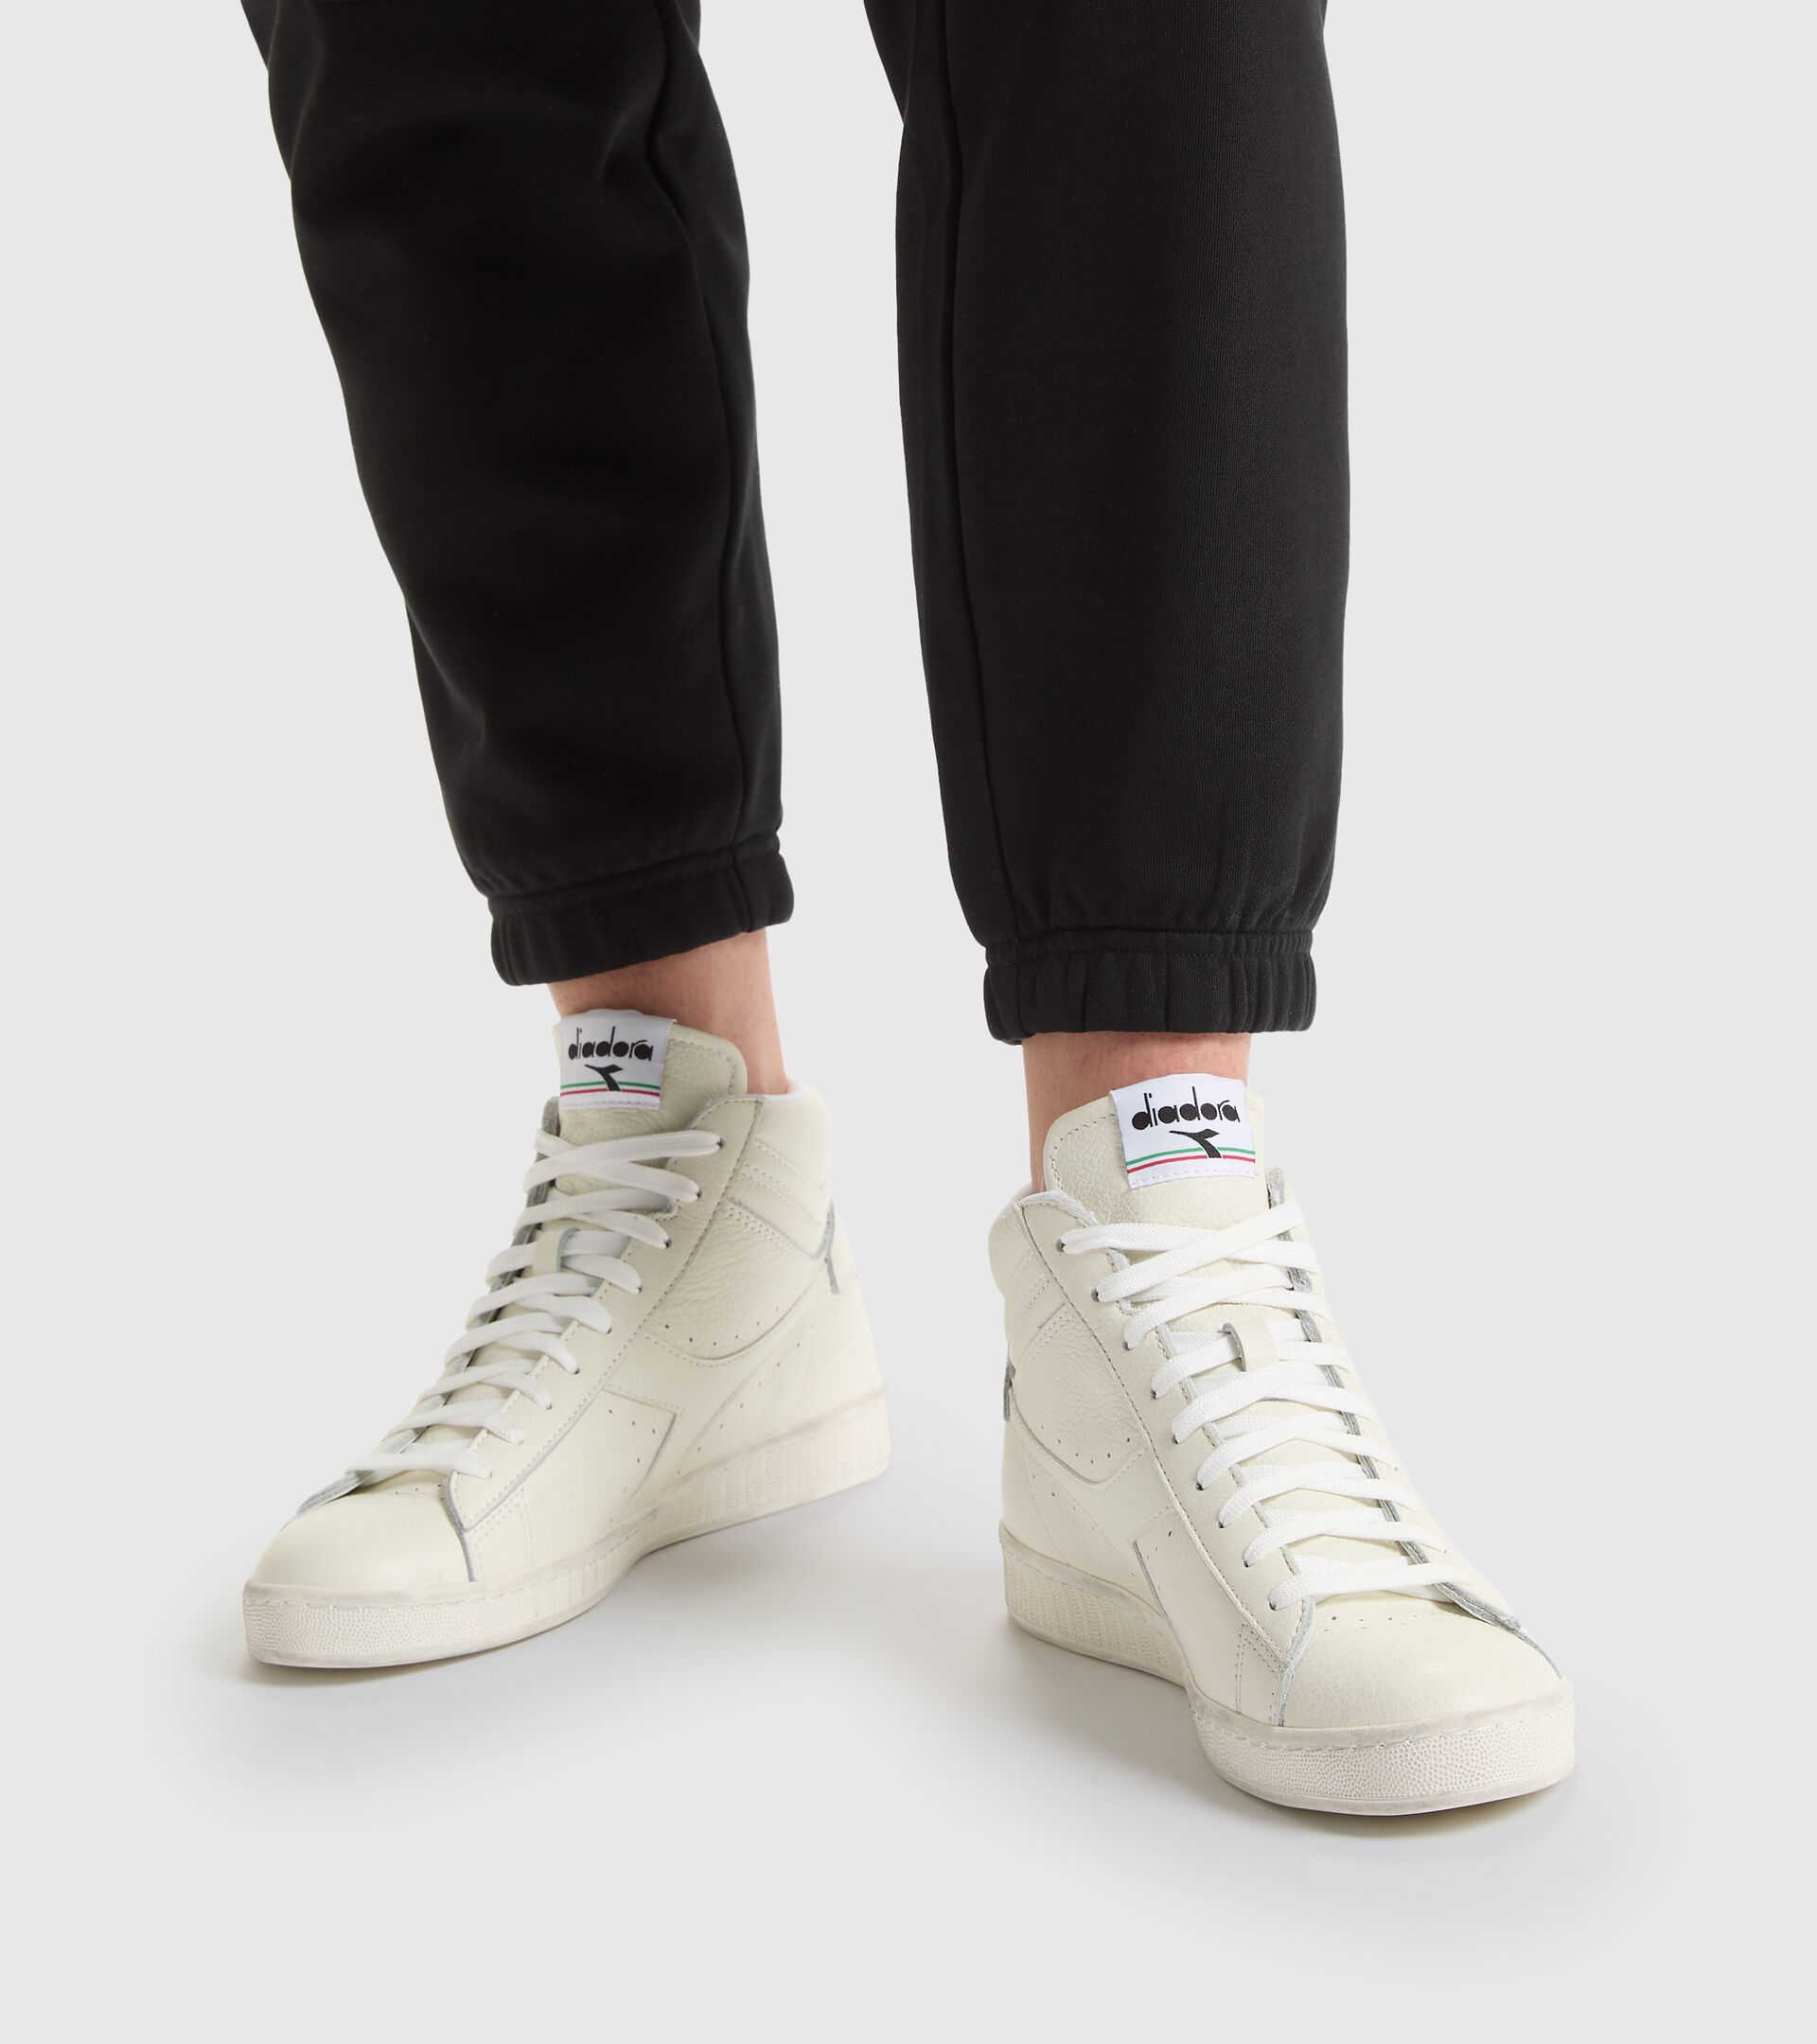 GAME L HIGH WAXED Sporty sneakers - Unisex - Diadora Online Store US